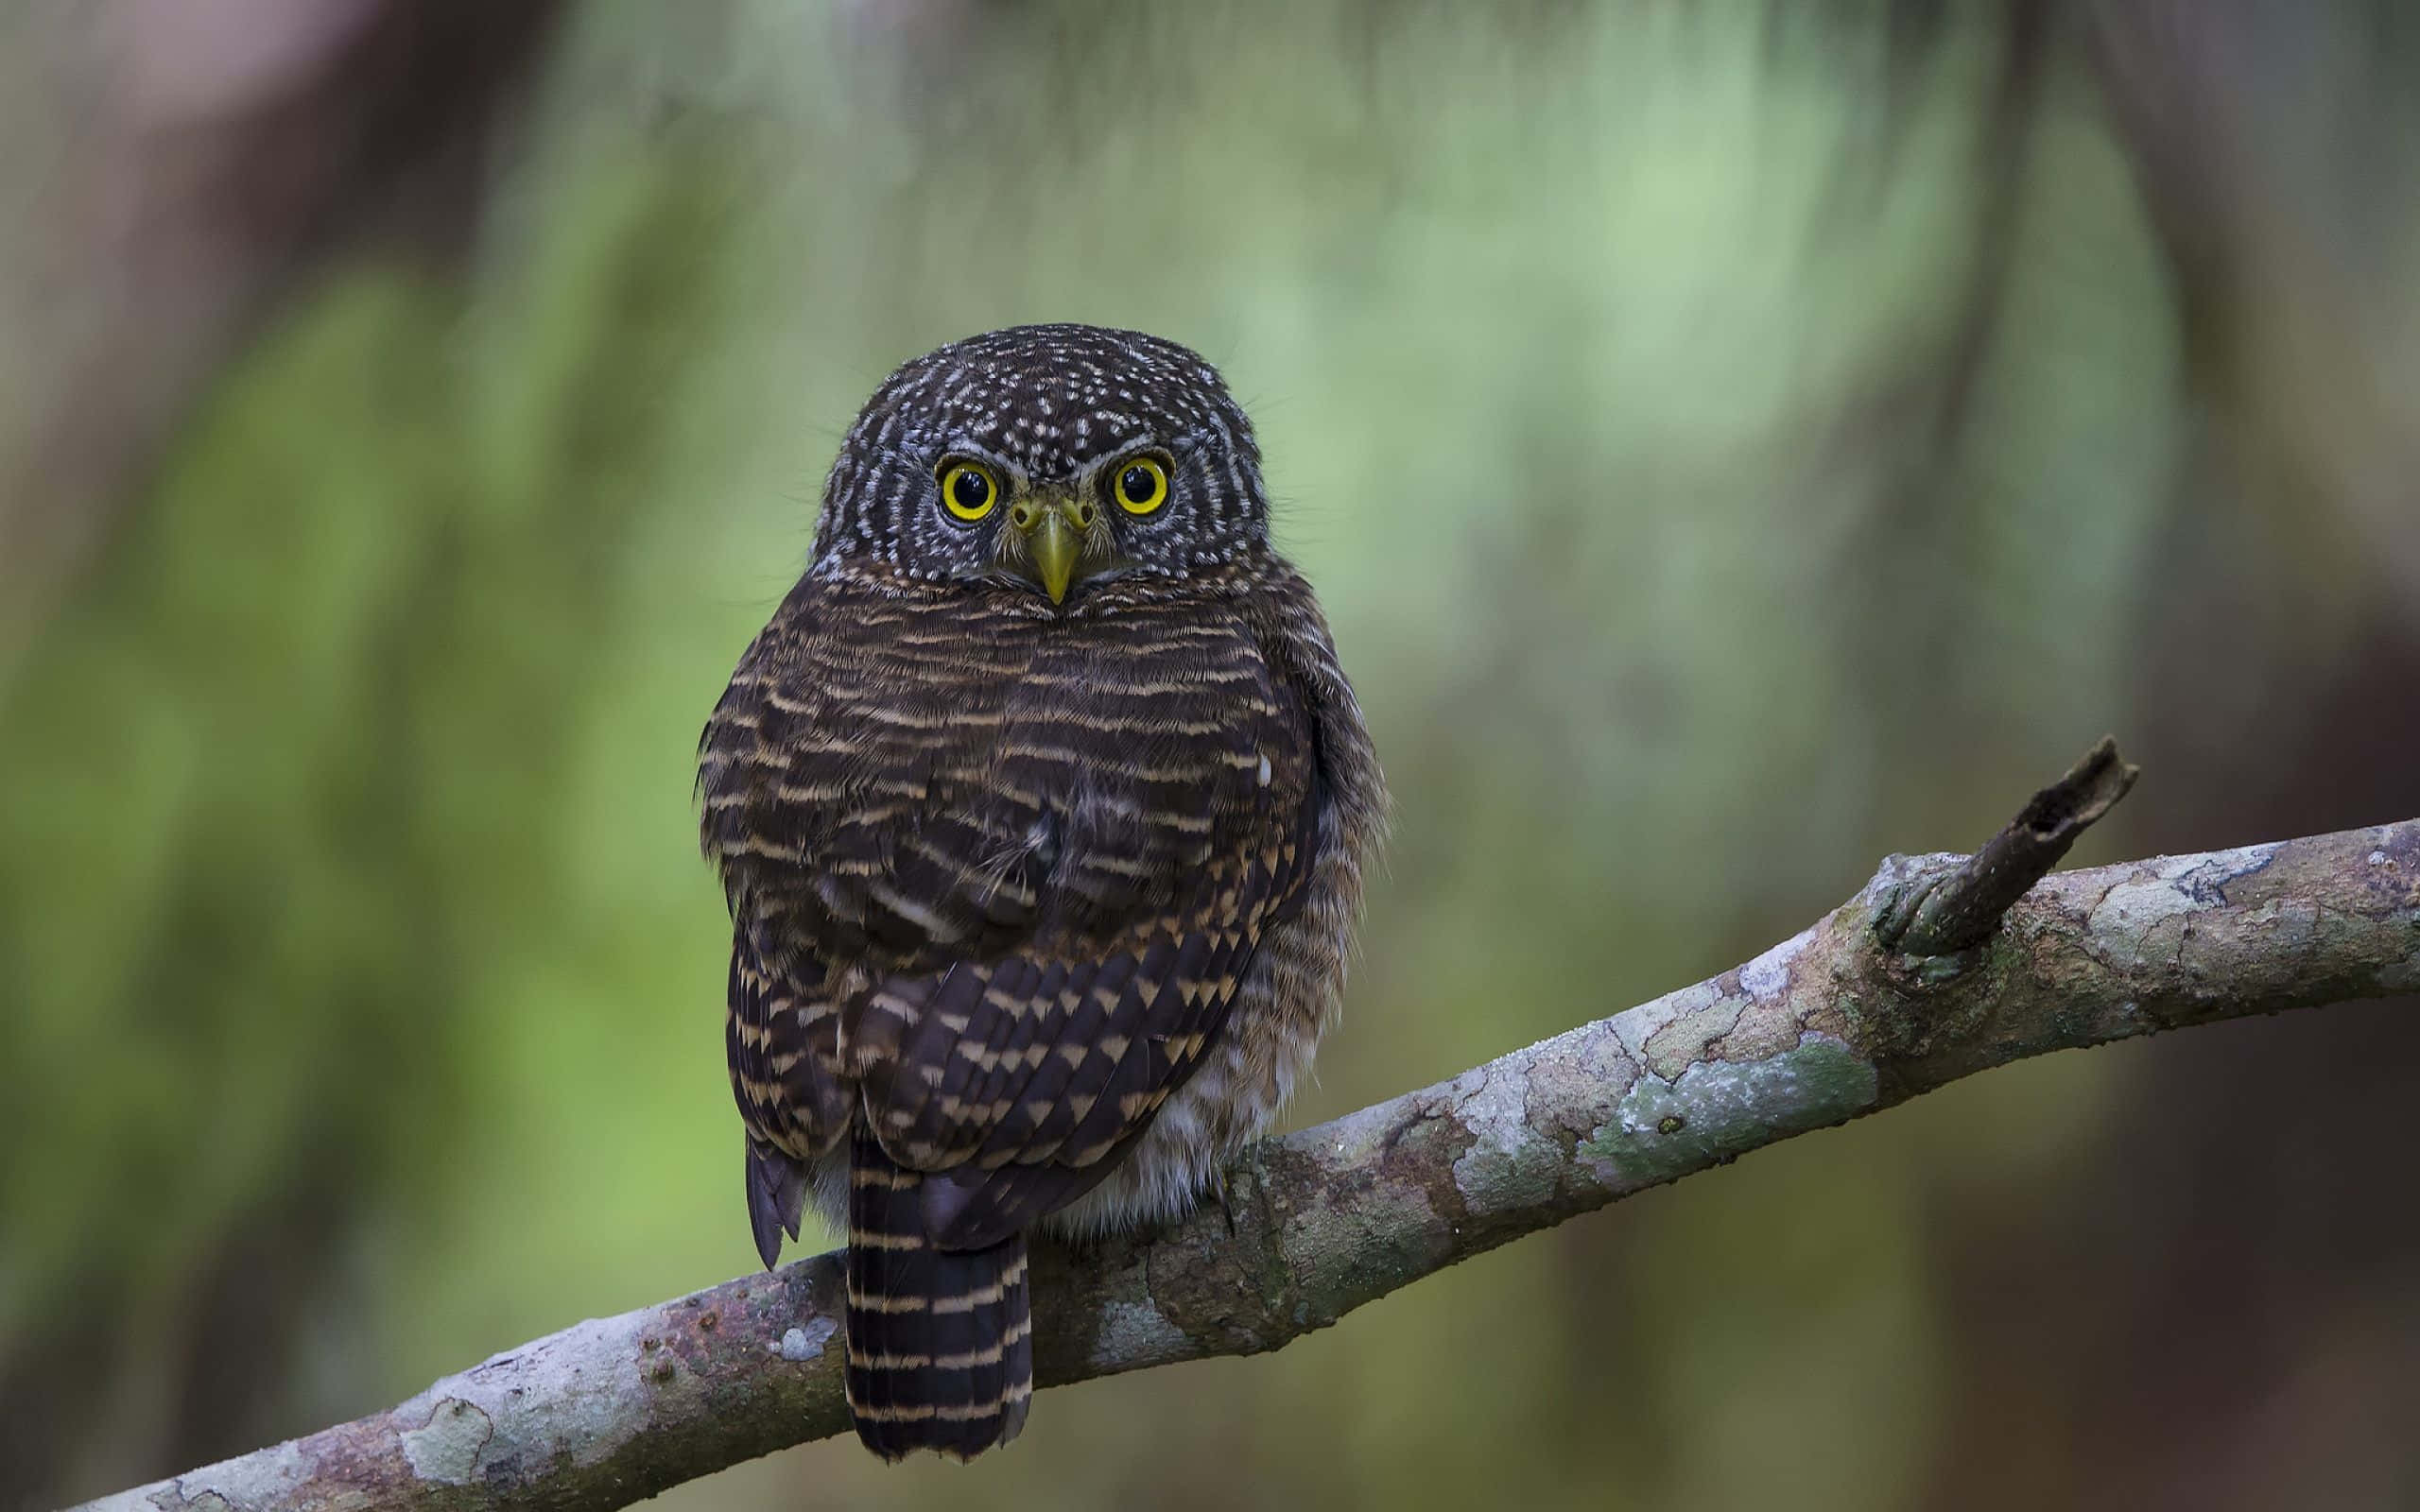 : An inquisitive owl peeks out from a branch